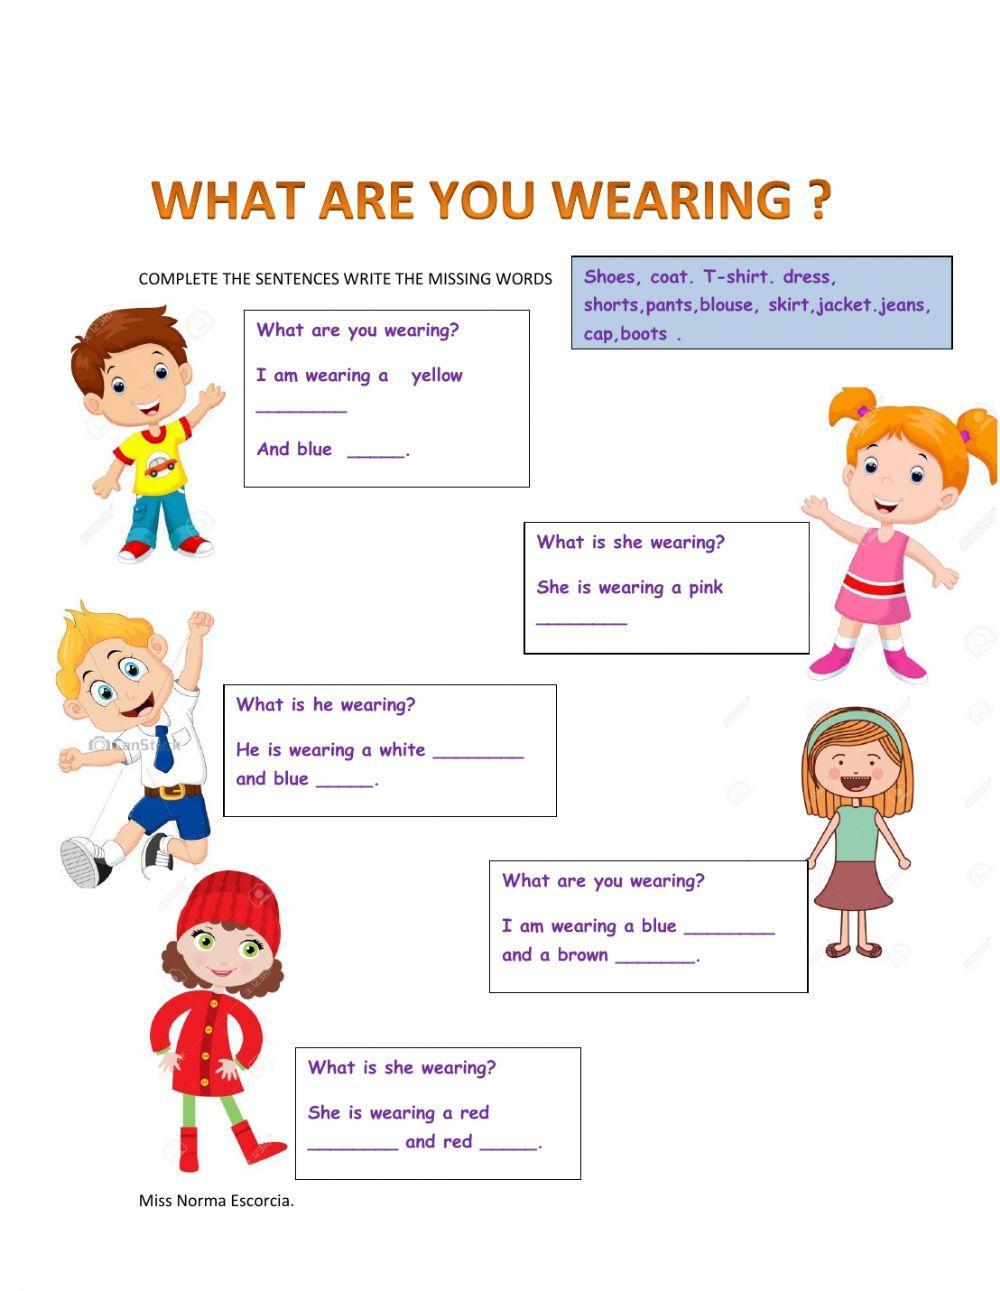 What are they wearing? interactive exercise for beginners | Live Worksheets